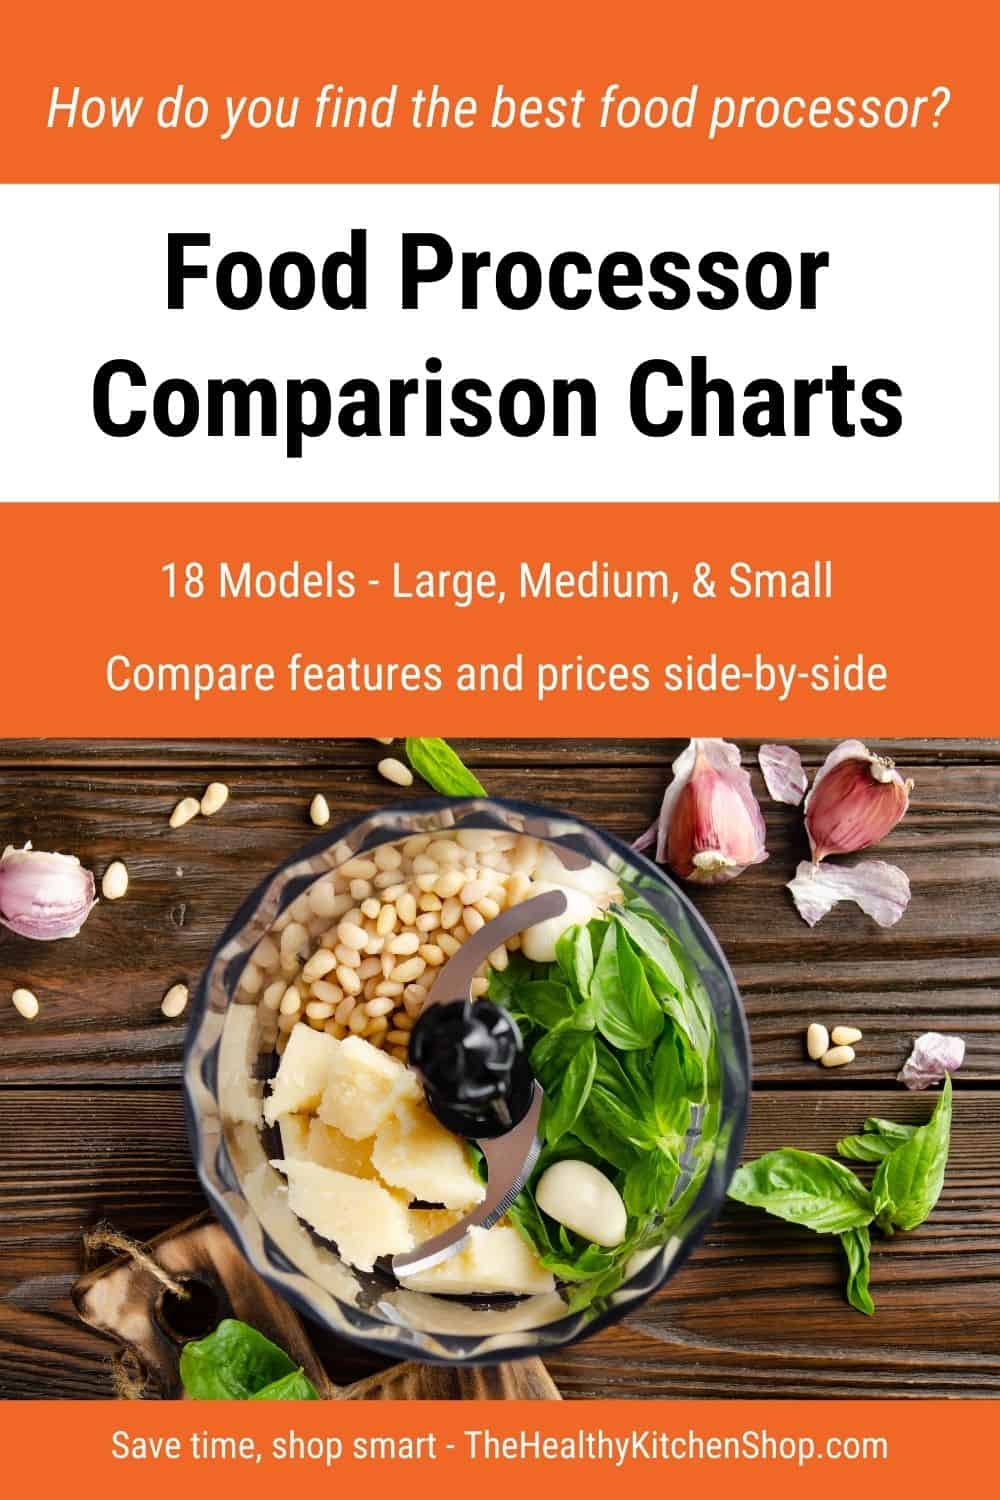 How to find the best food processor - Food Processor Comparison Charts